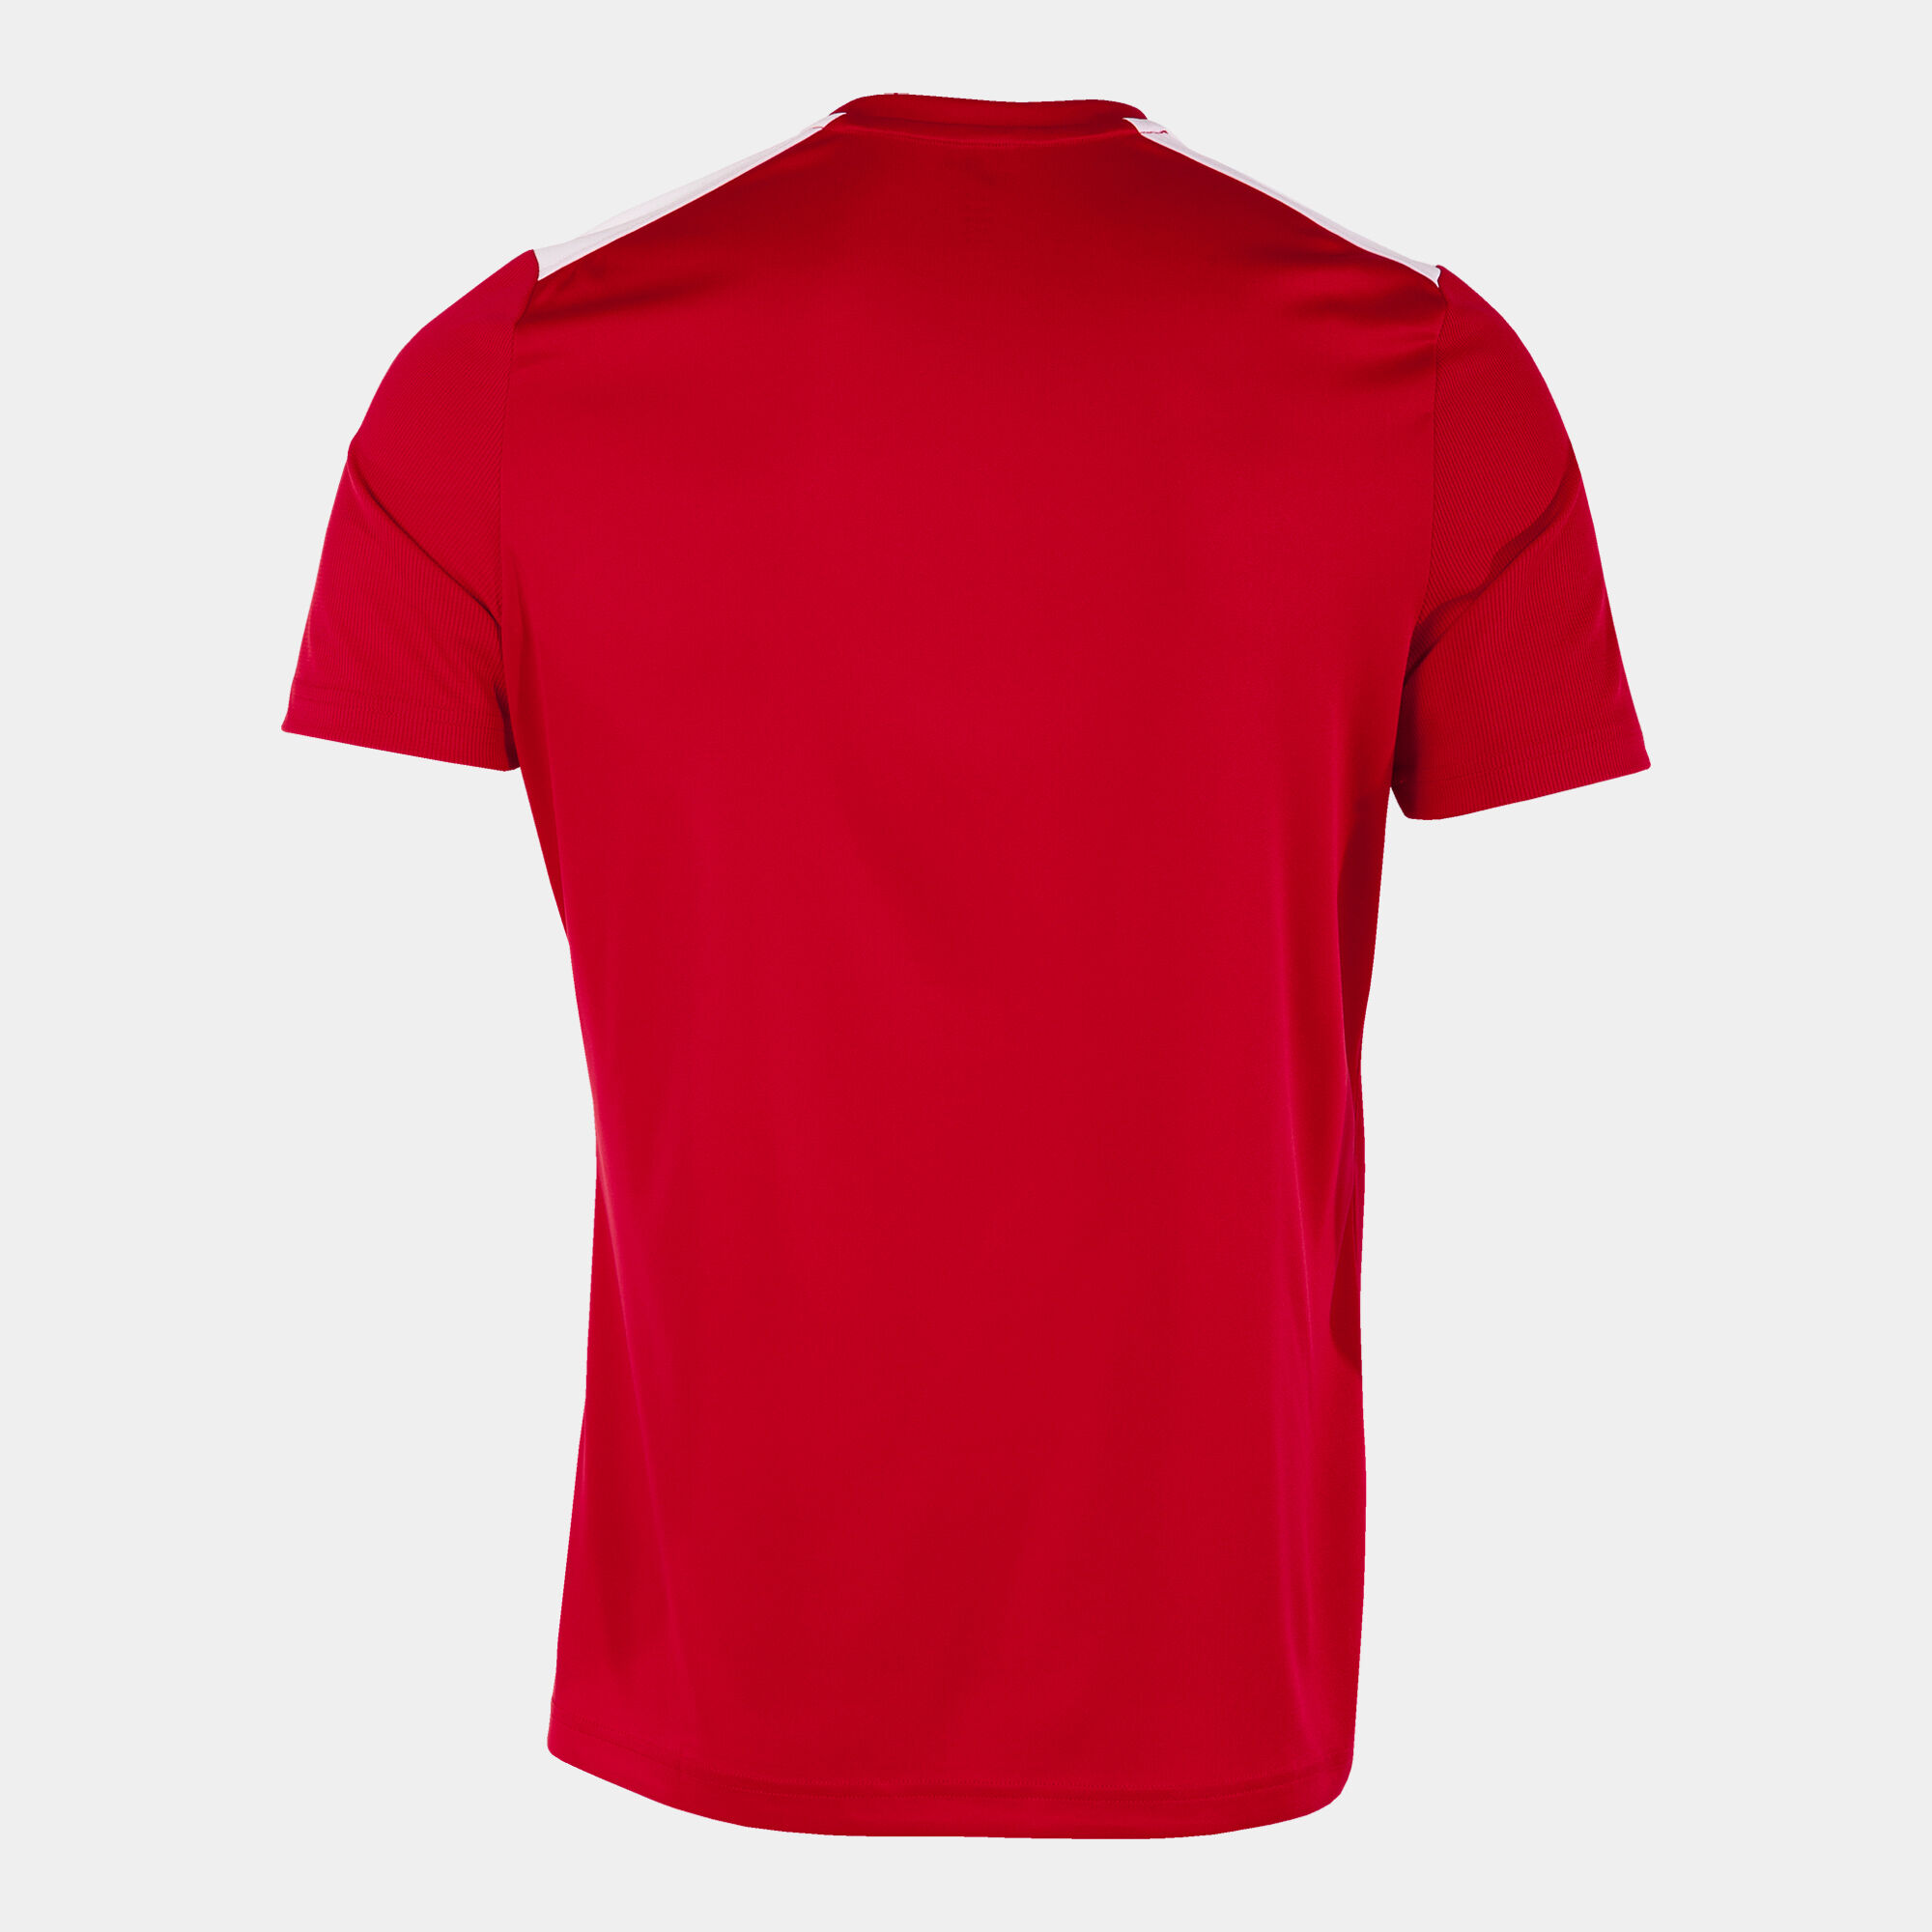 Maillot manches courtes homme Championship VII rouge blanc